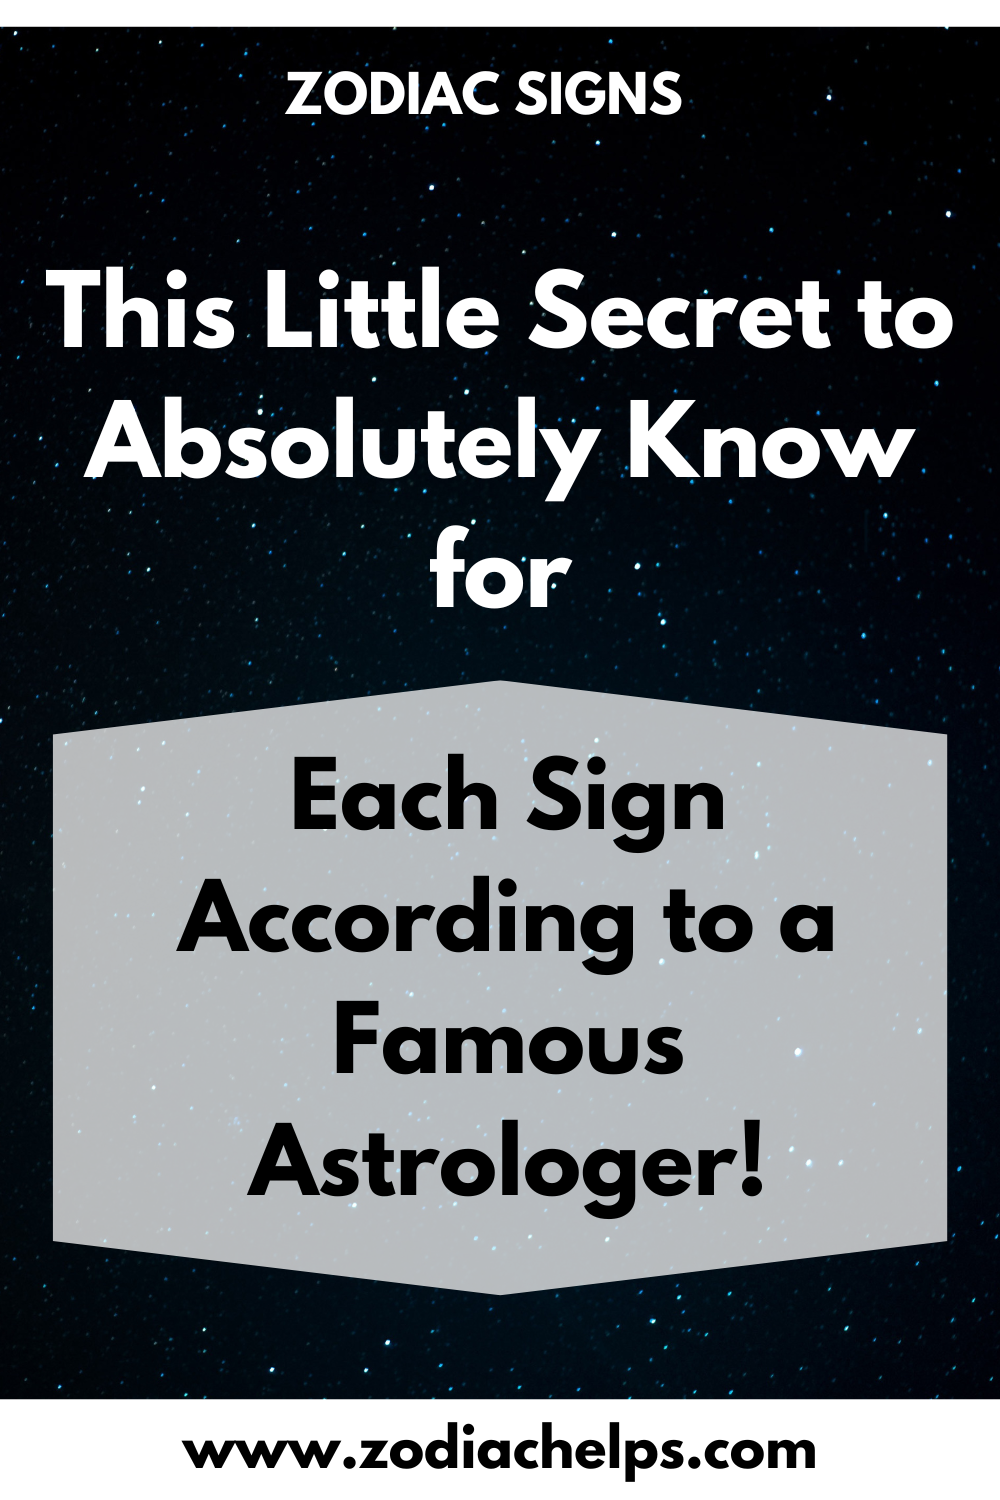 This Little Secret to Absolutely Know for Each Sign According to a Famous Astrologer!